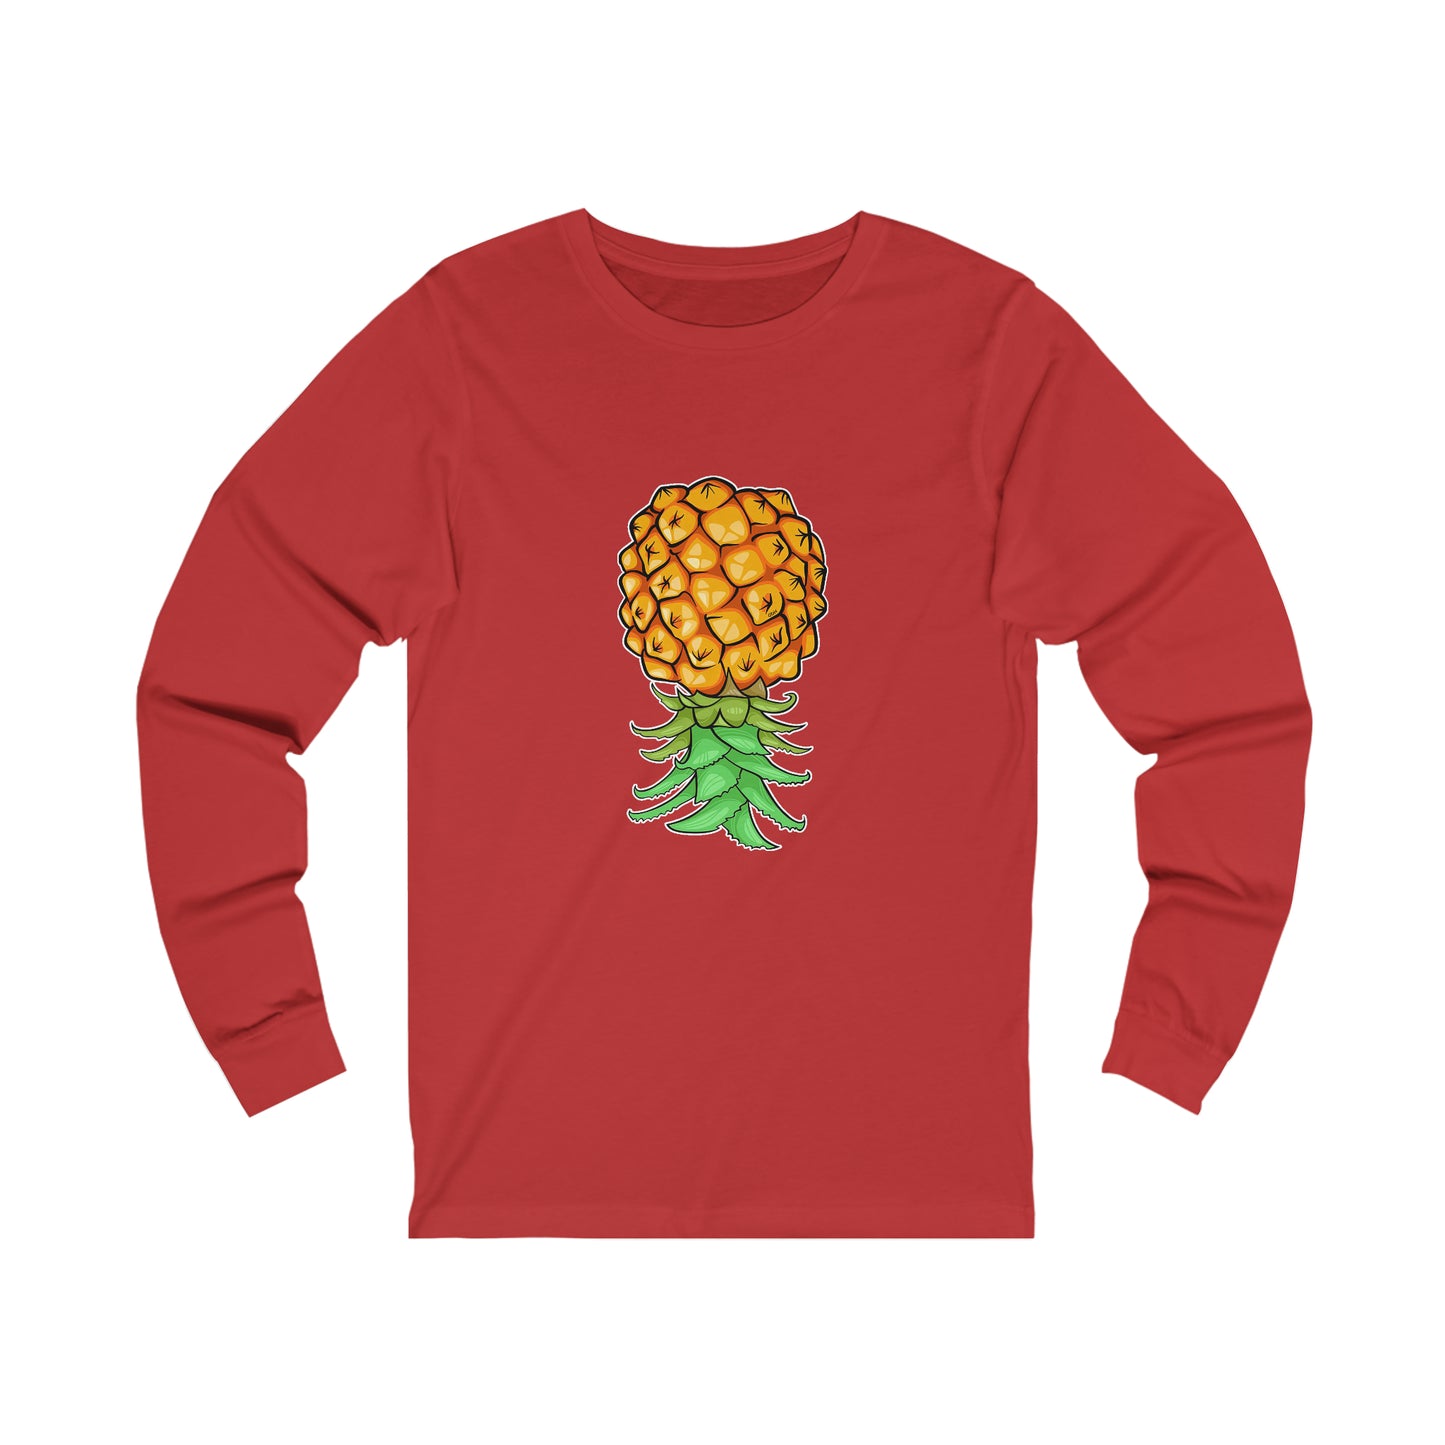 Upside Down Pineapple Unisex Jersey Long Sleeve Tee If You Know You Know